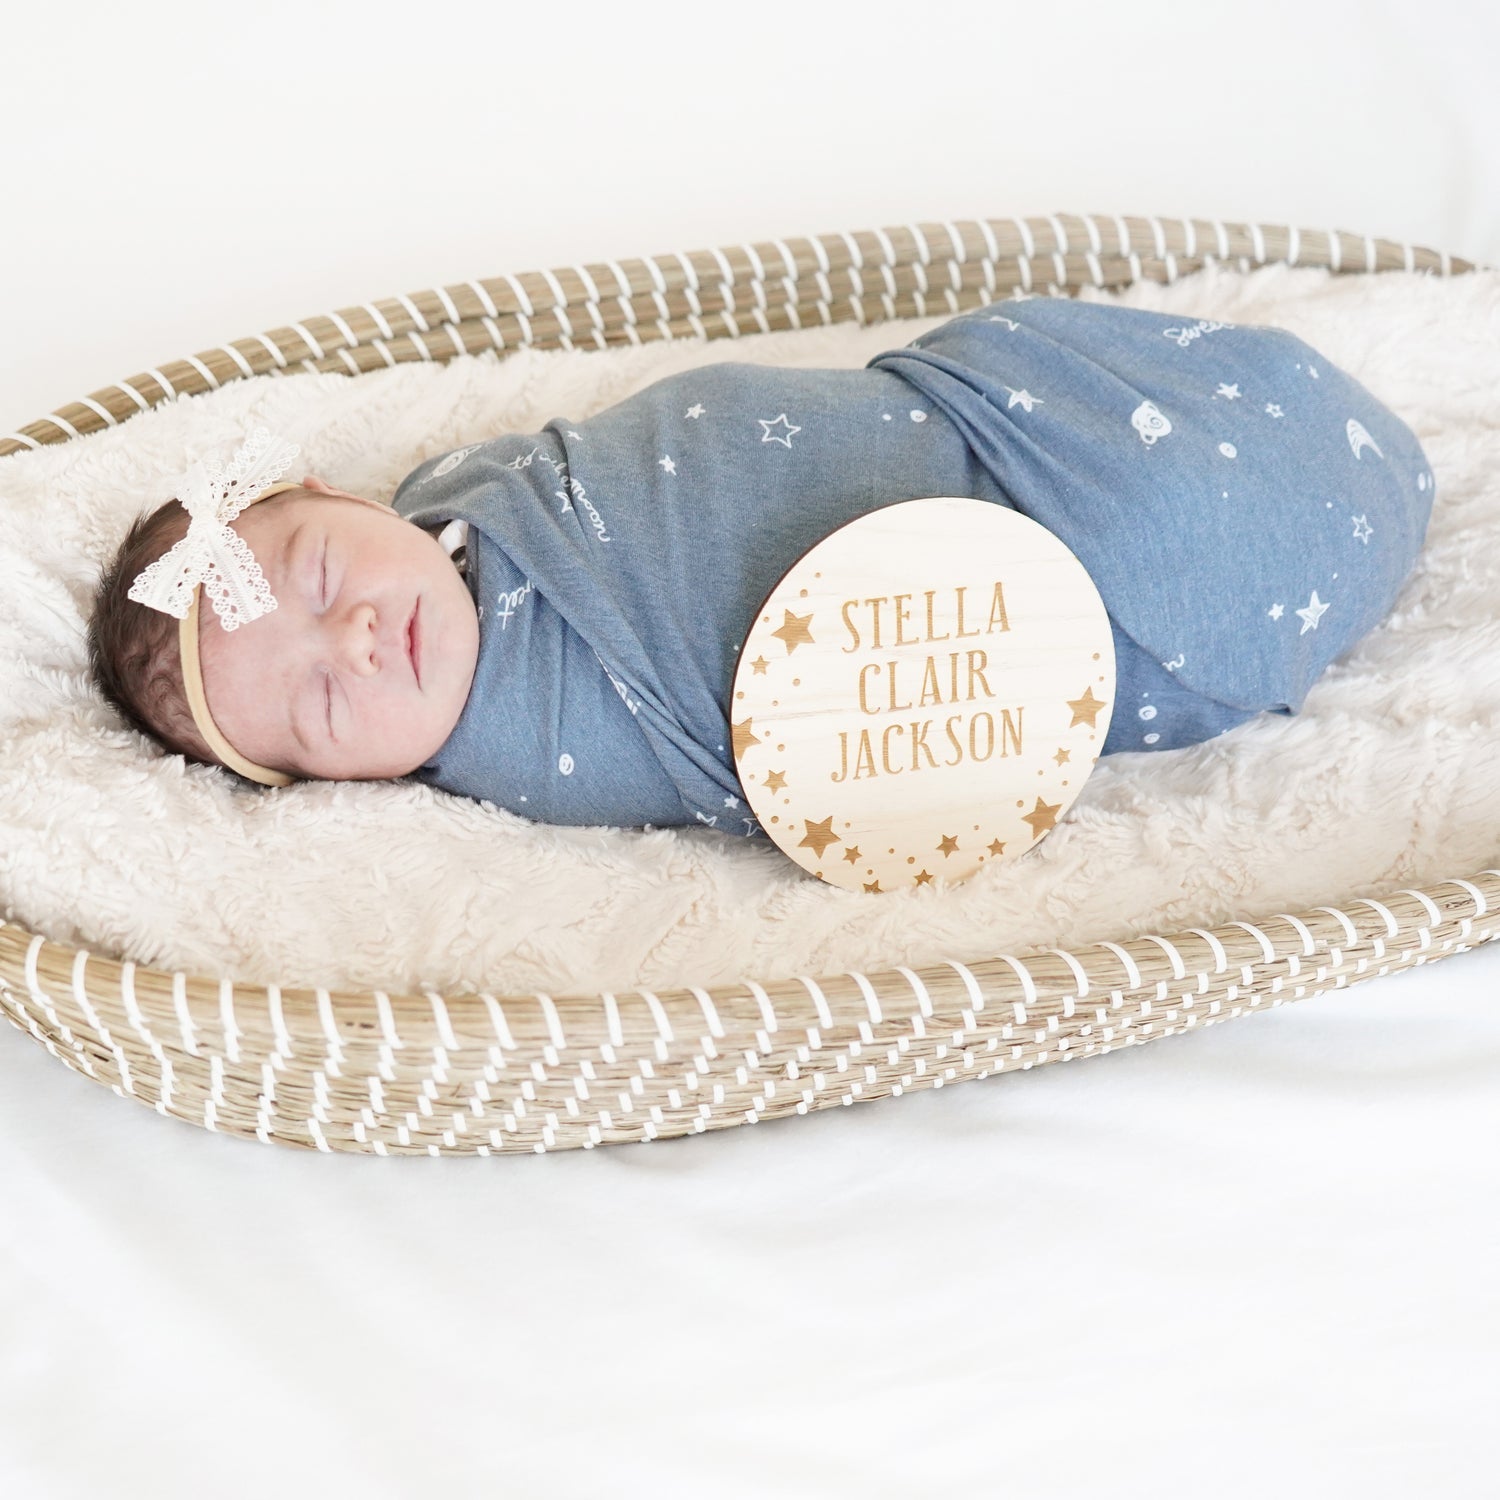 baby in basinet with swaddle, bow, and star name sign